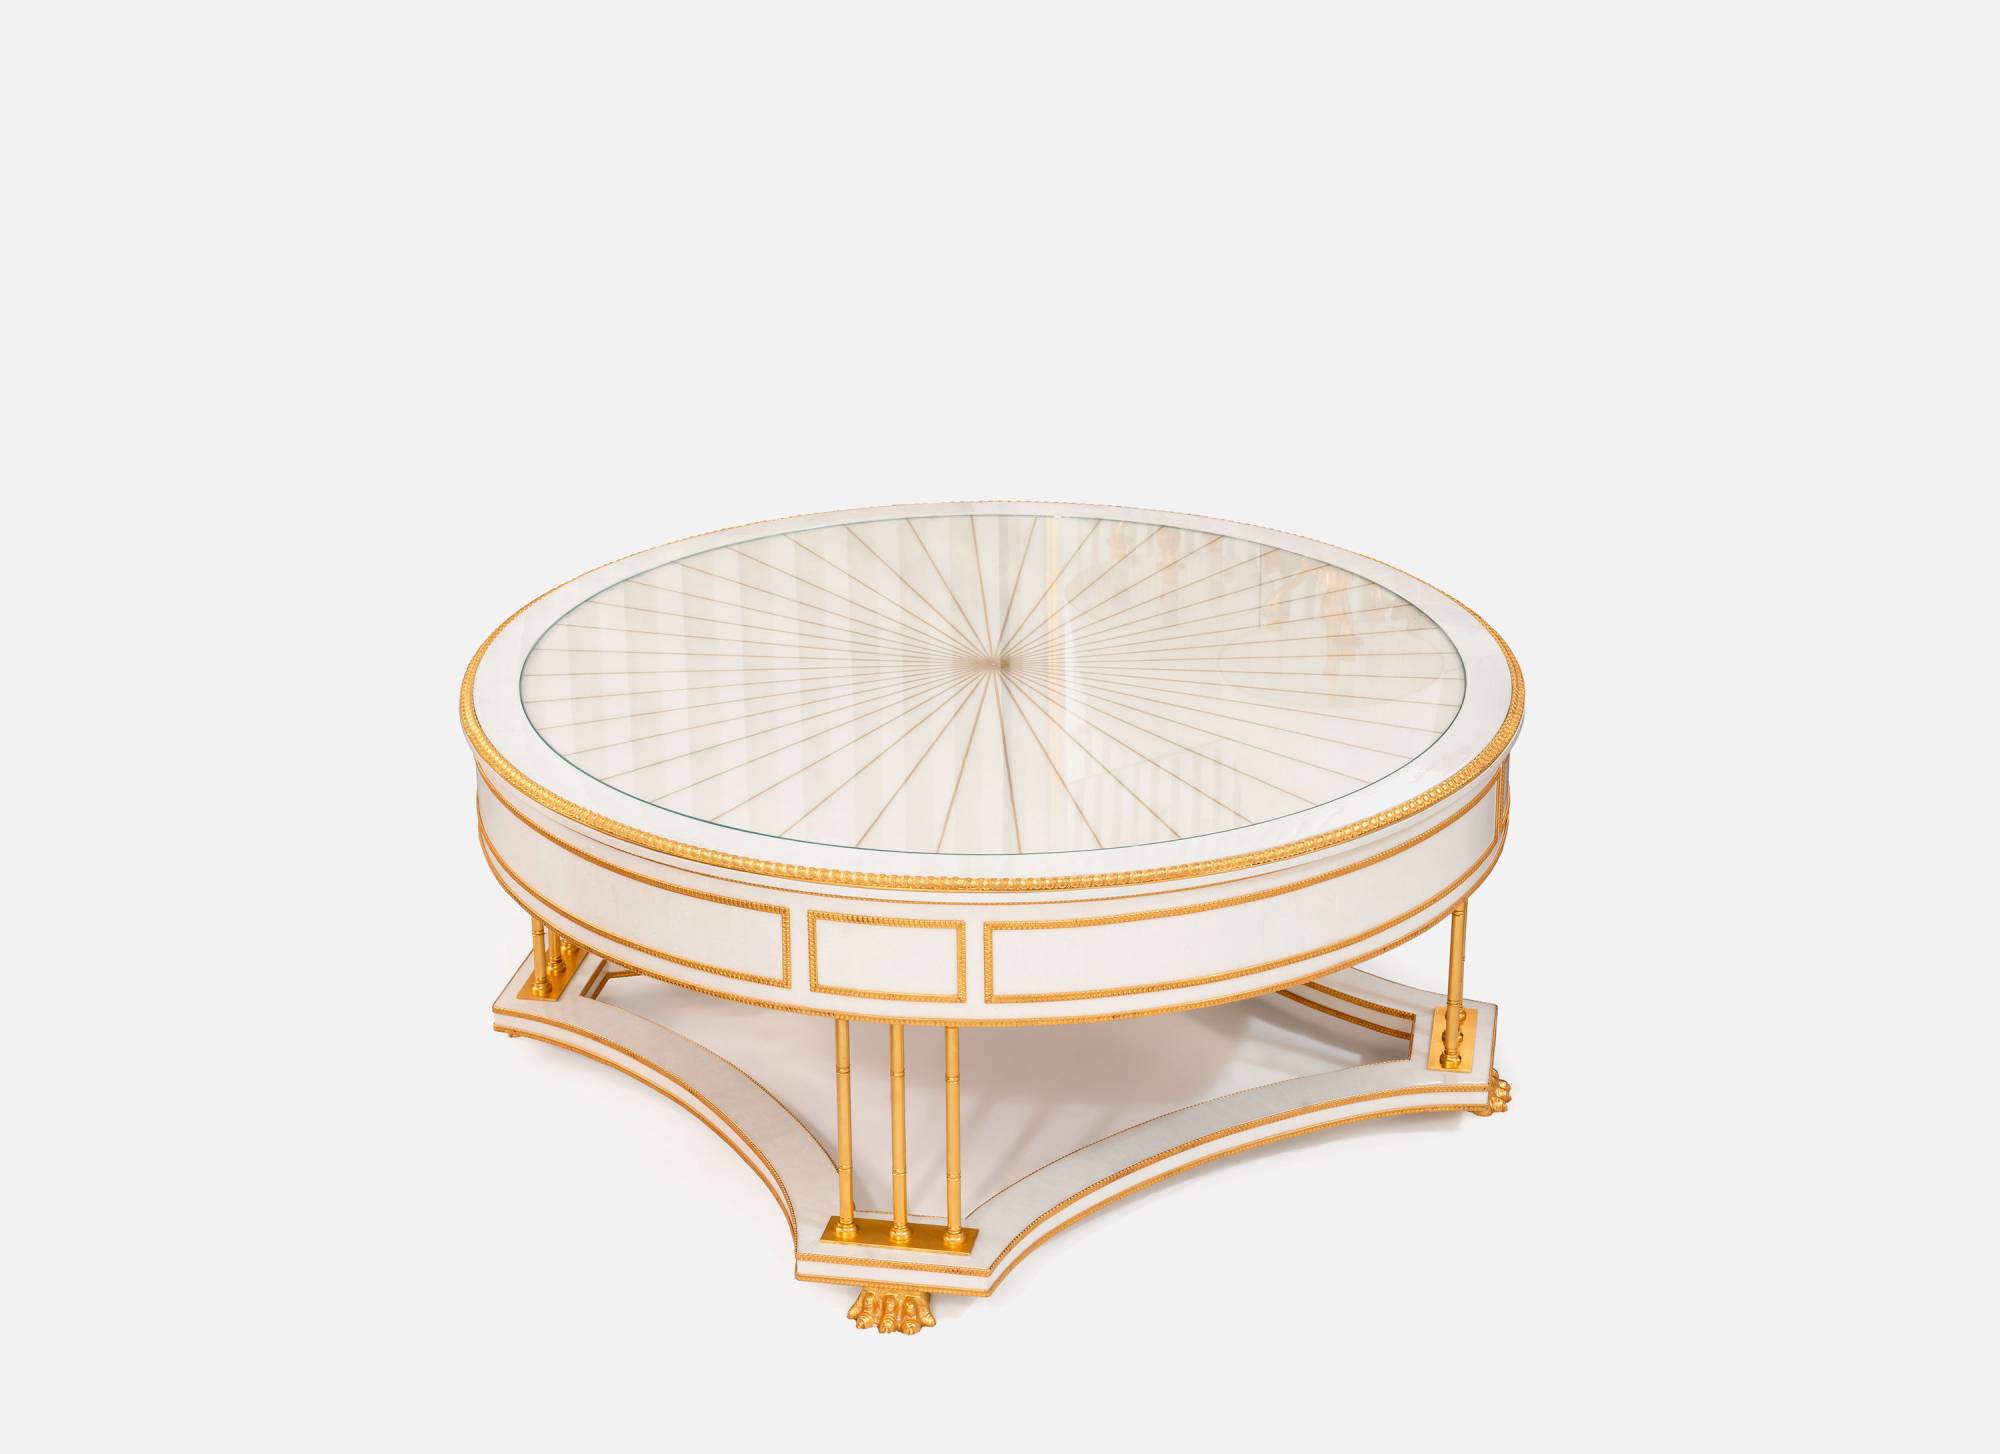 ART. 922-22 – The elegance of luxury classic Small tables made in Italy by C.G. Capelletti.